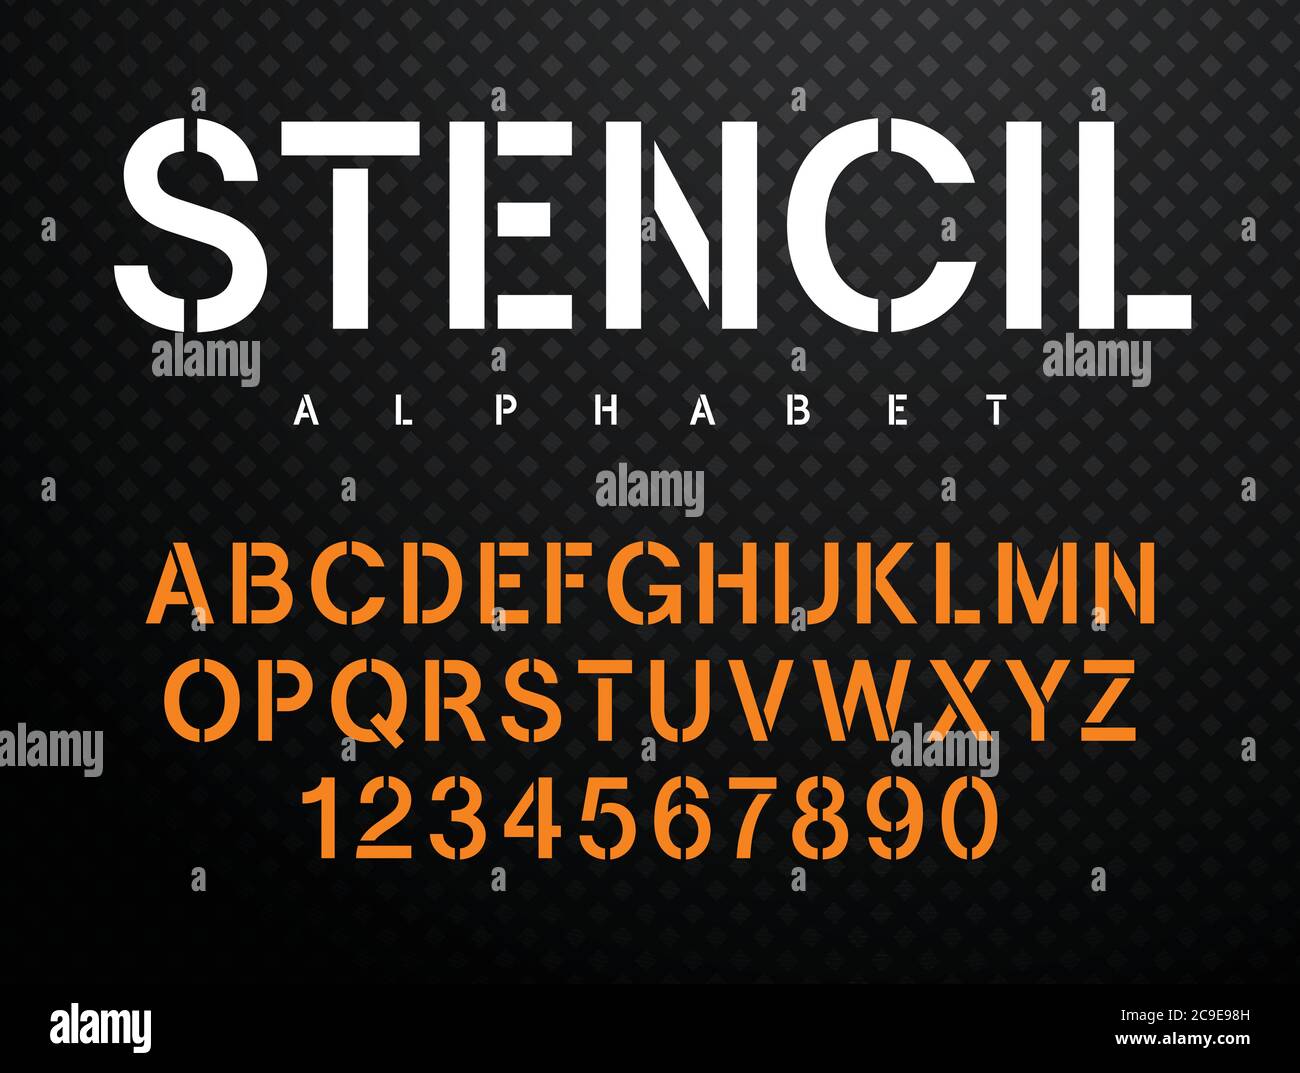 Stencil alphabet. Stencil-plate font in military style. Vectors Stock Vector